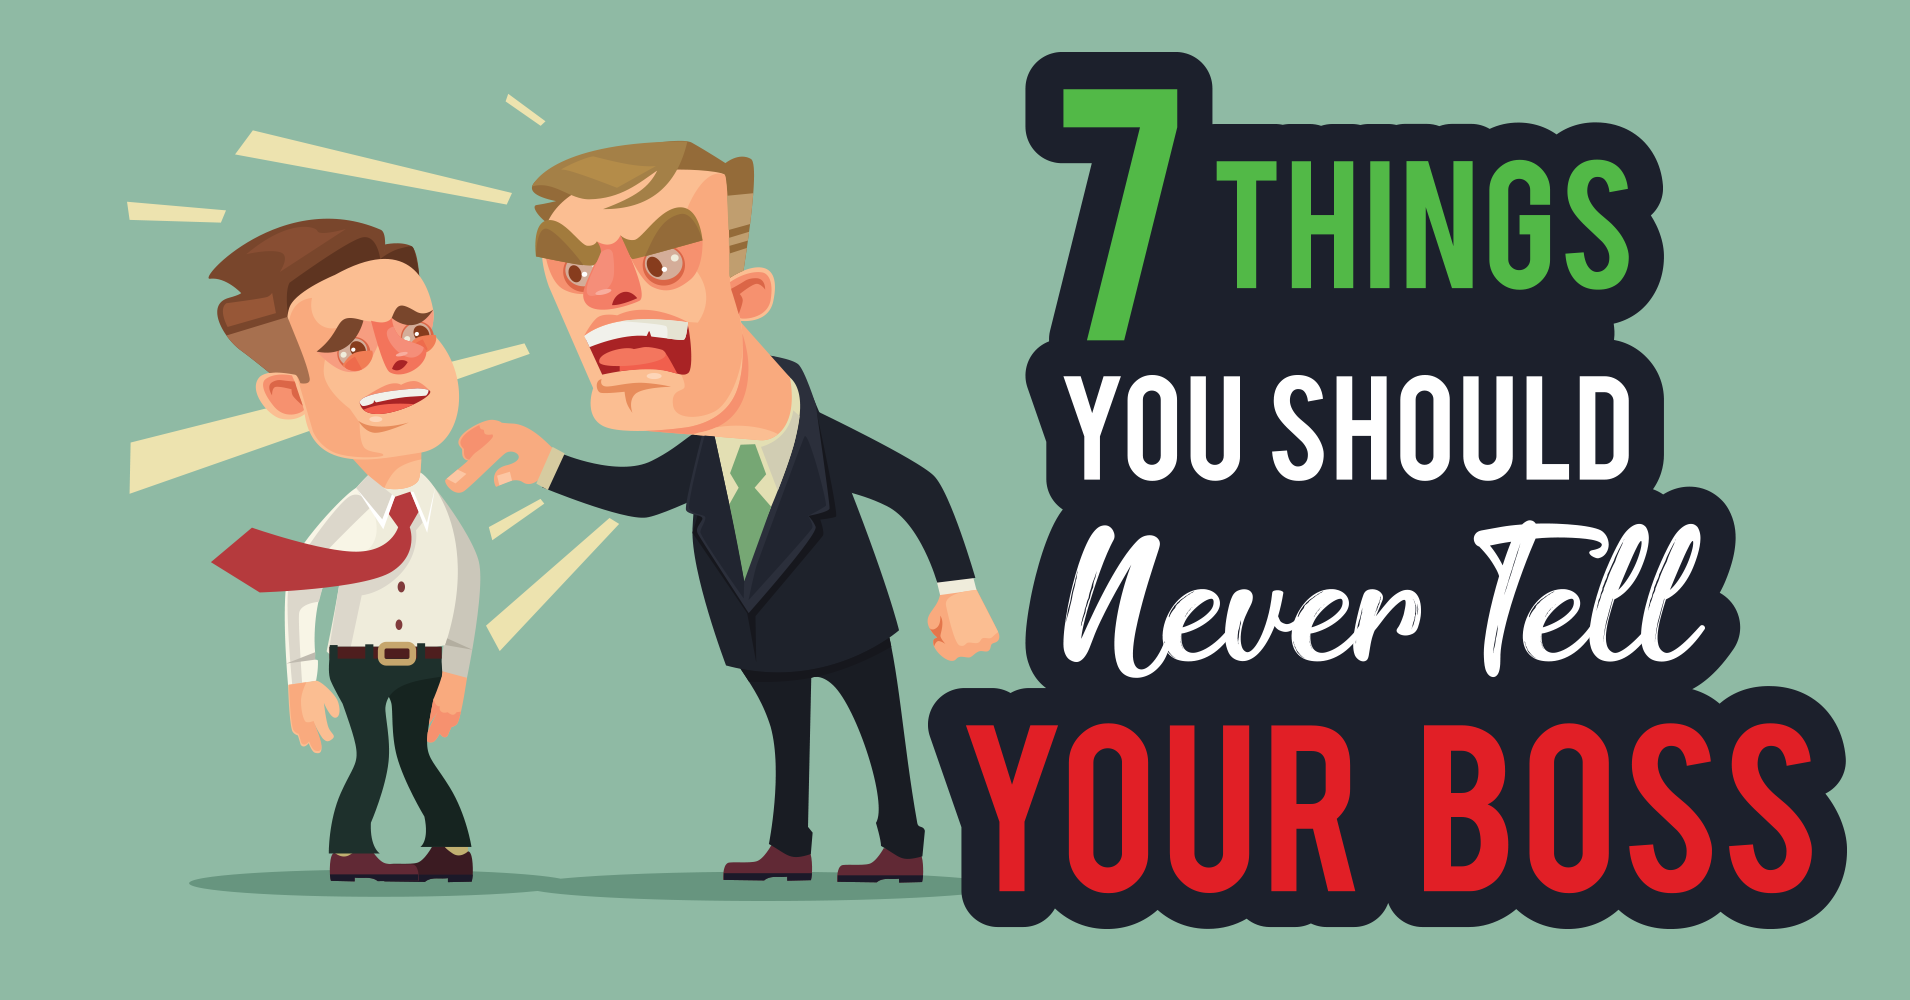 7 Things You Should Never Tell Your Boss Article 